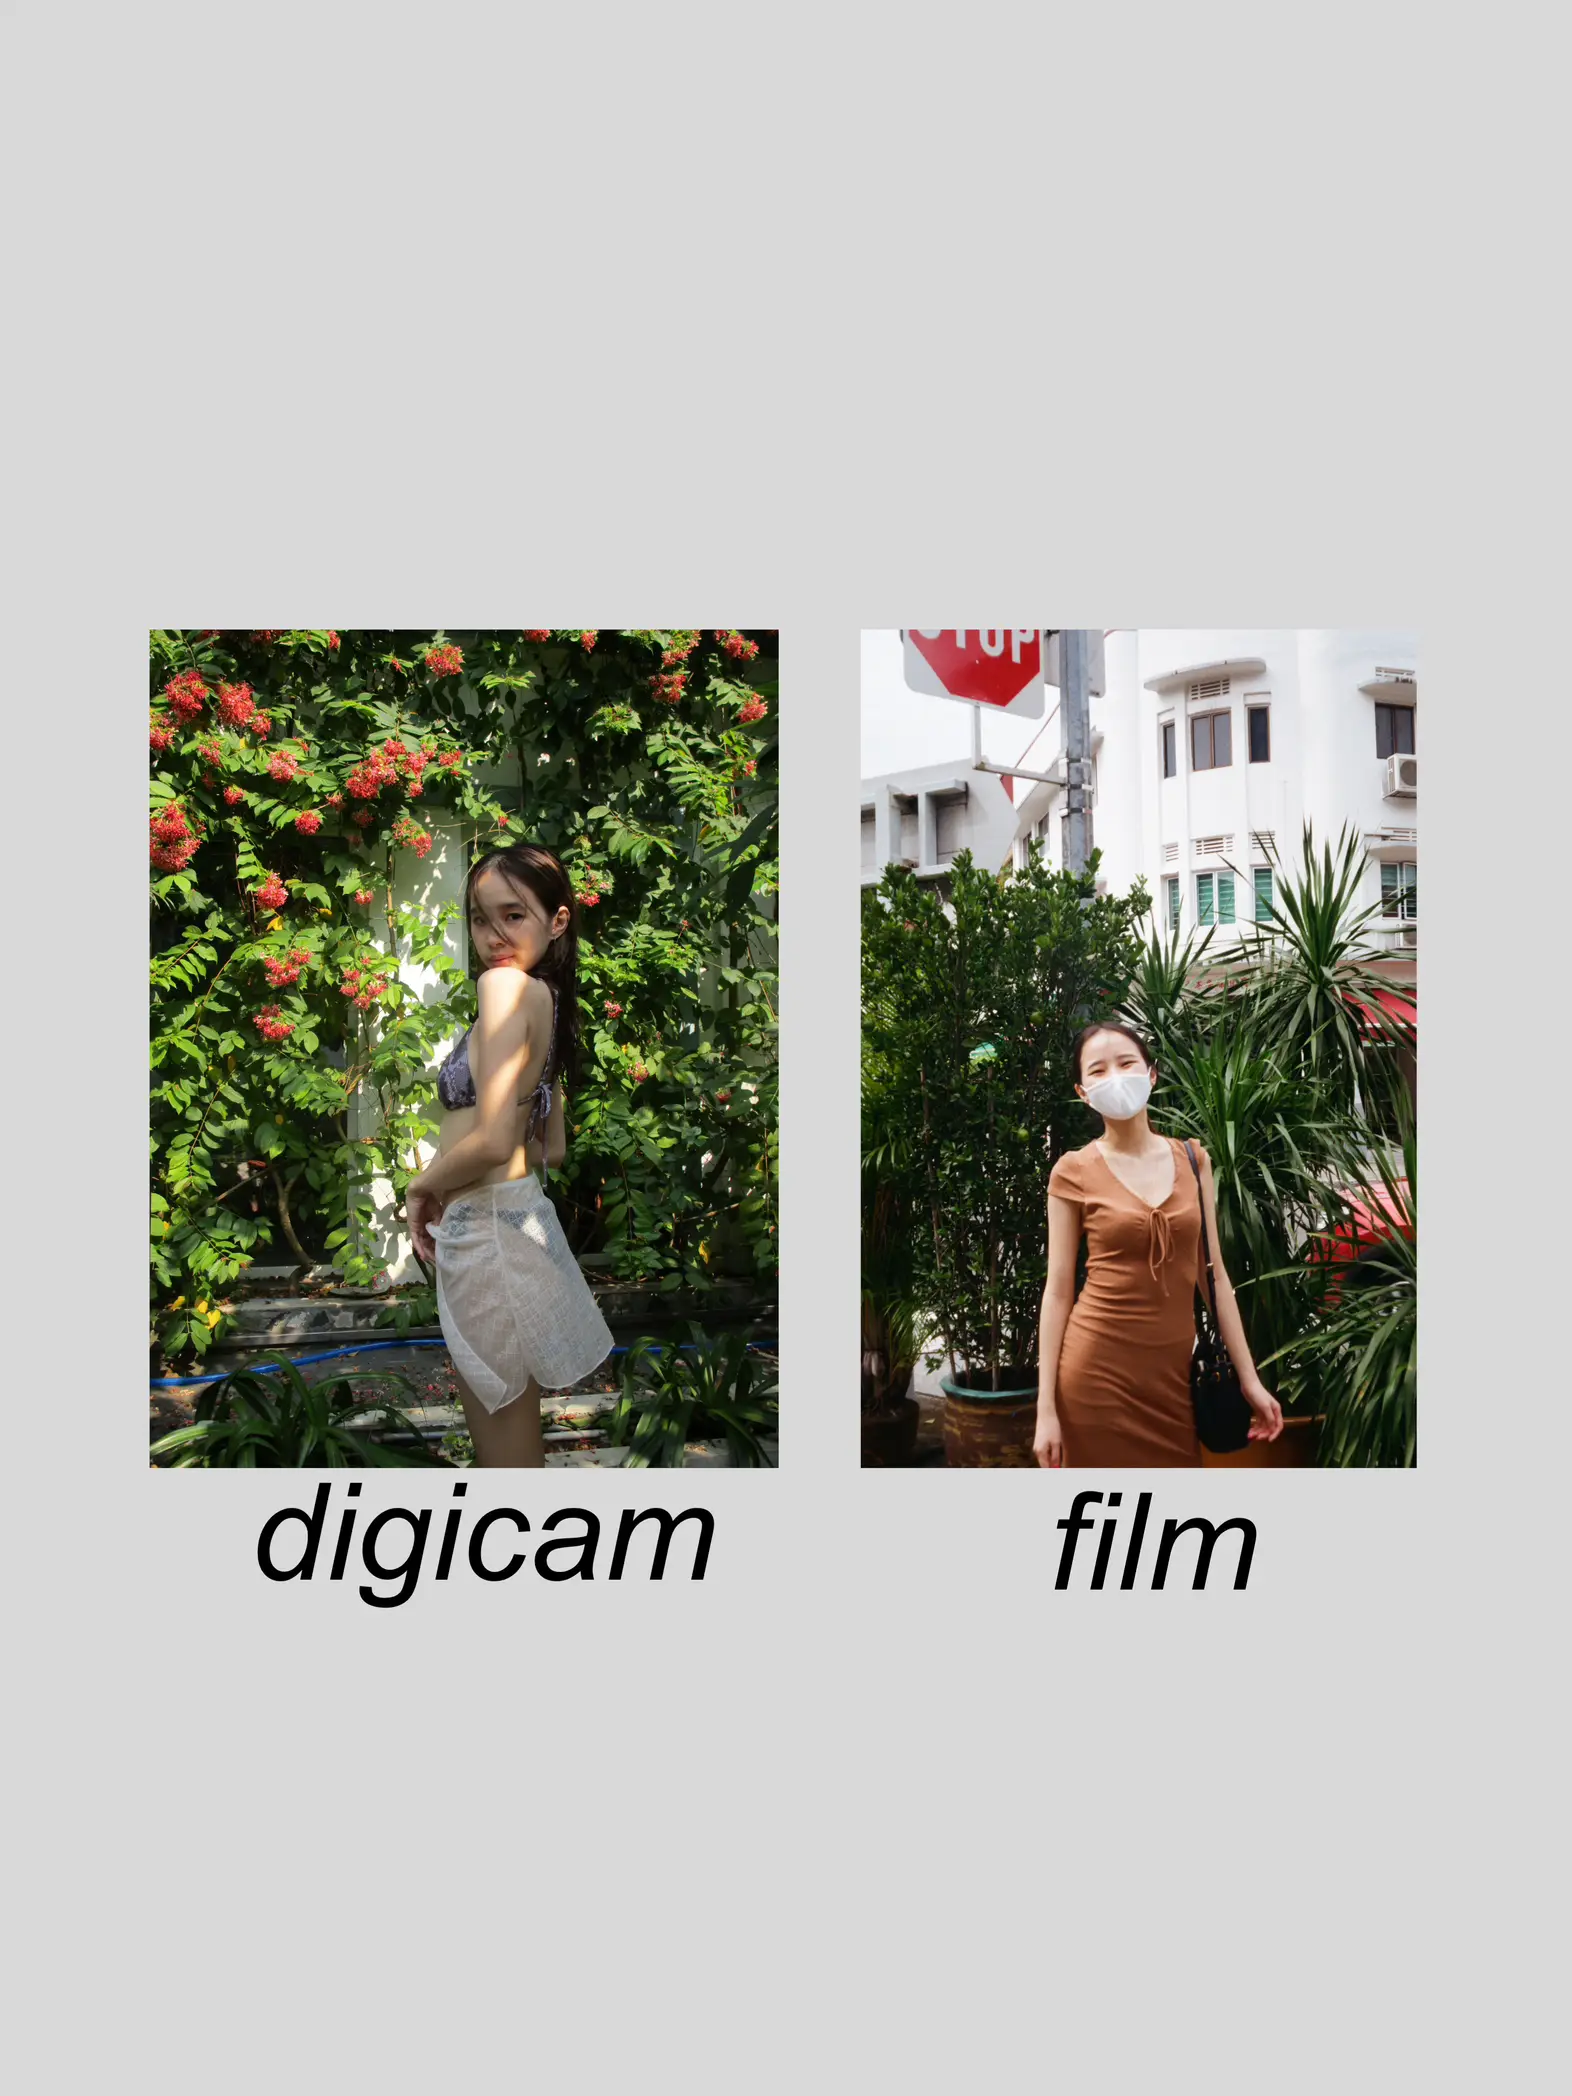 is a digicam worth the hype? 📸's images(1)